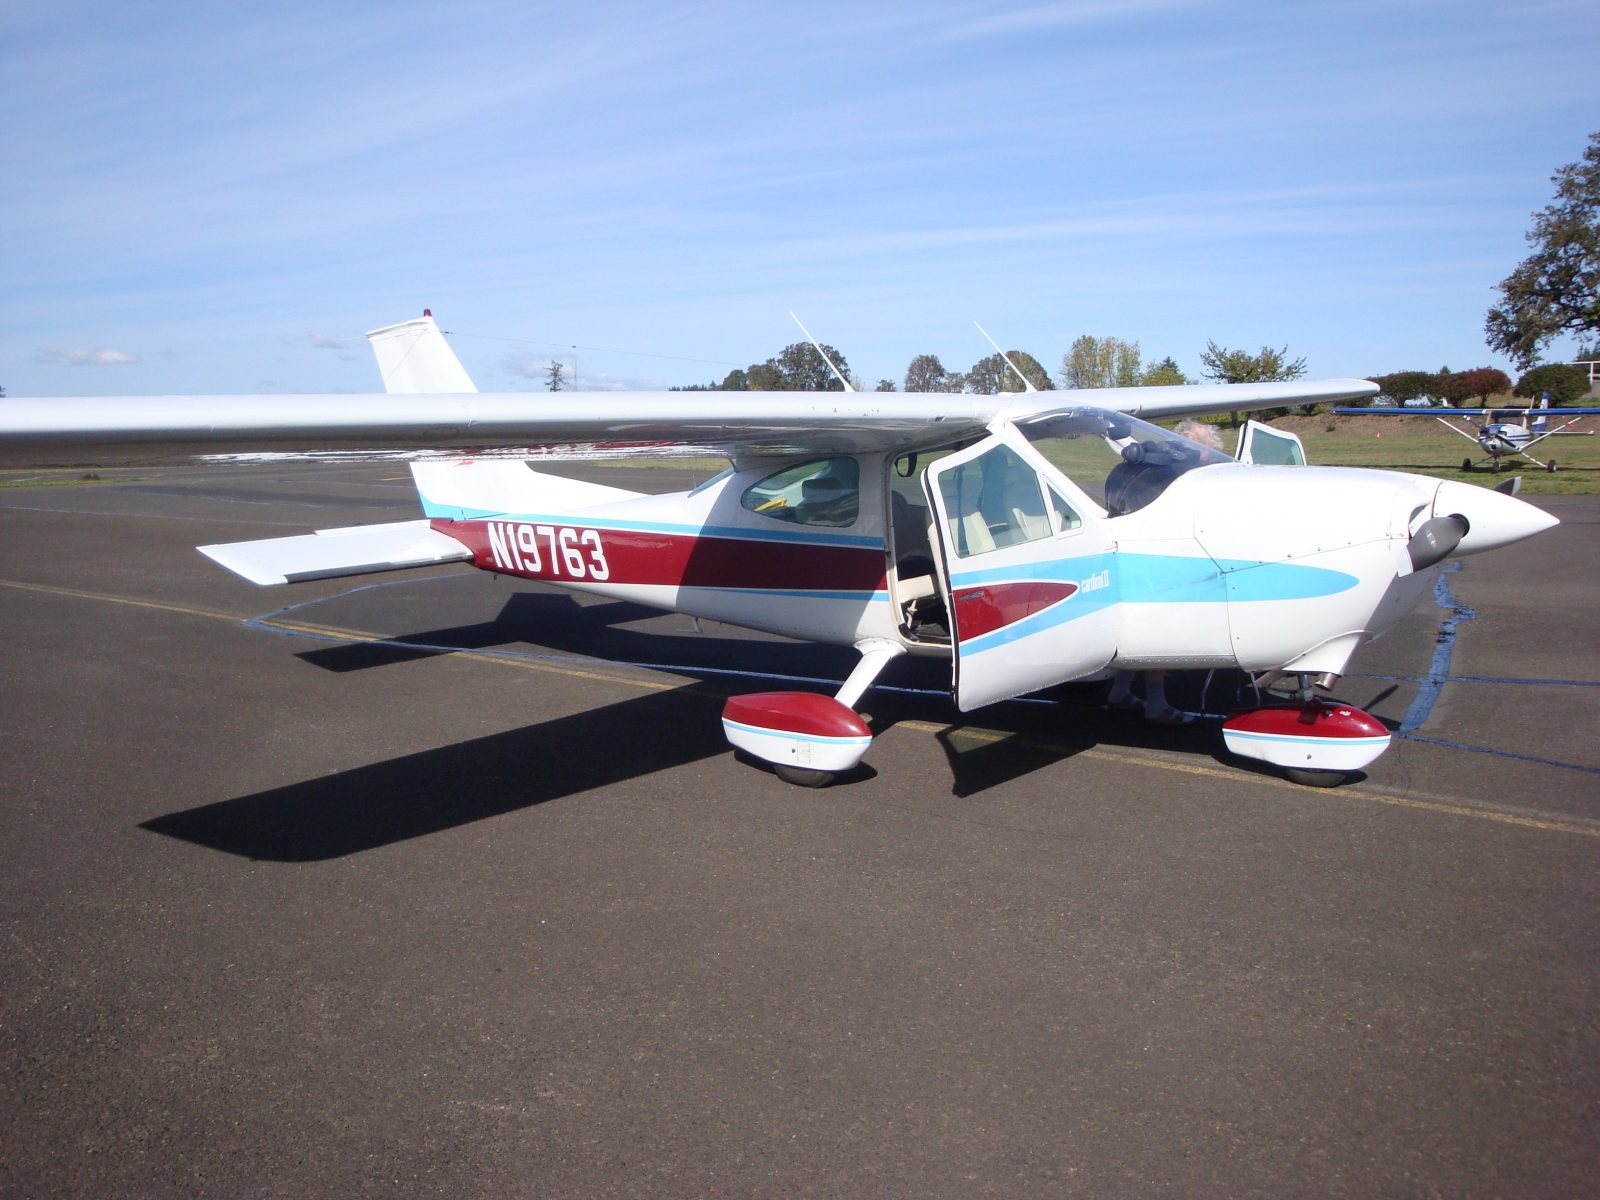 My good friends have this sweet 1976 Cessna Cardinal II single engine plane.  They let me go flying with them!